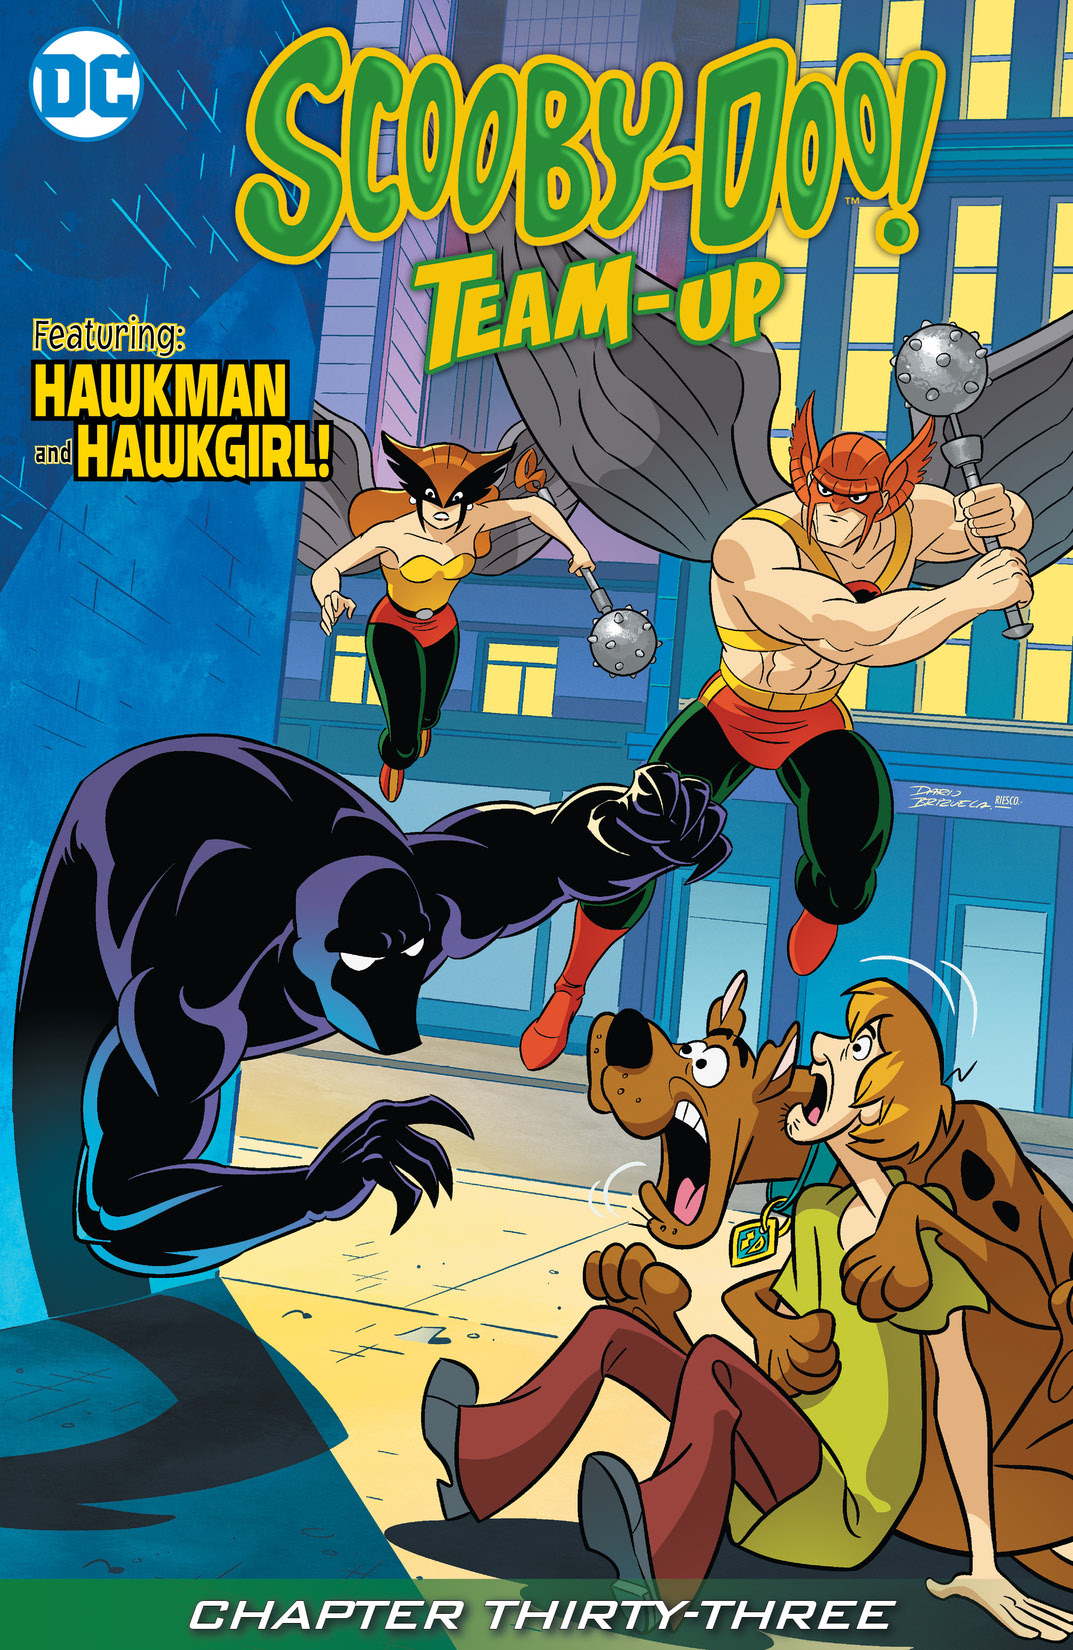 Scooby-Doo Team-Up #33 preview images